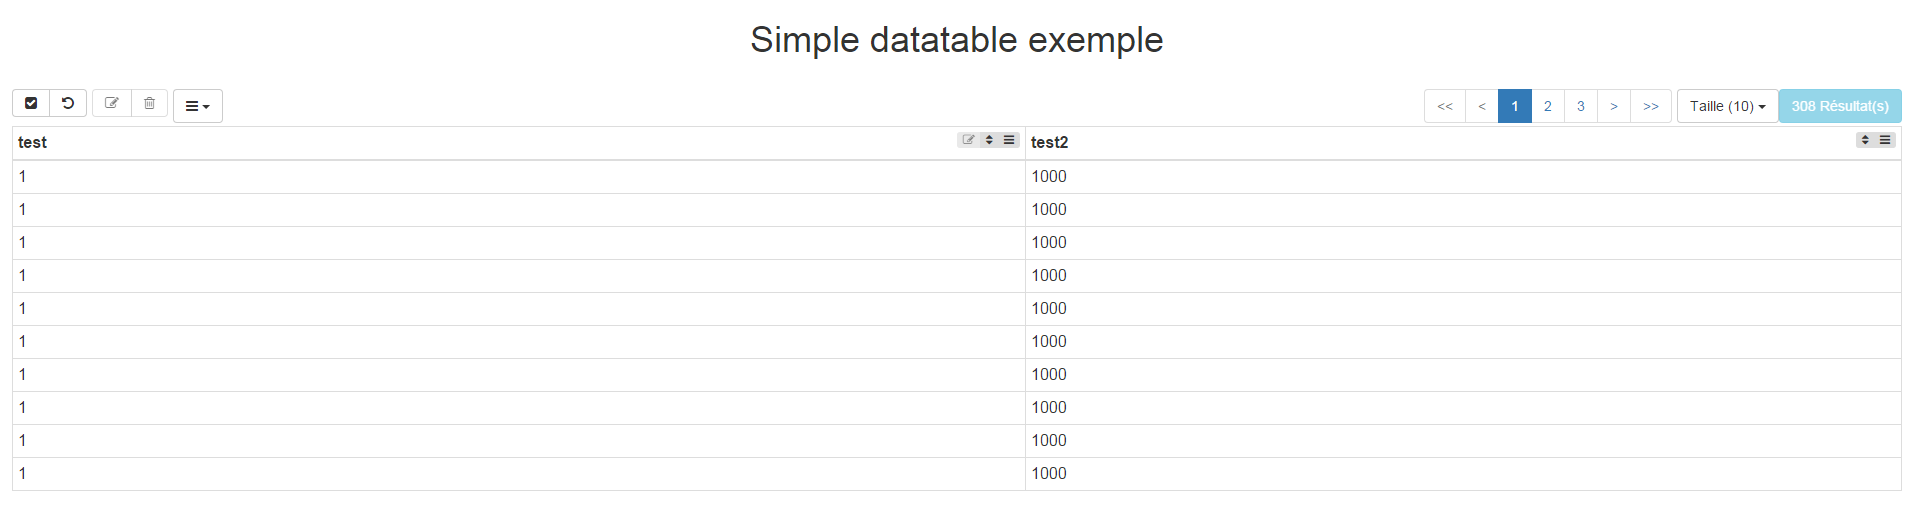 Simple datatable example